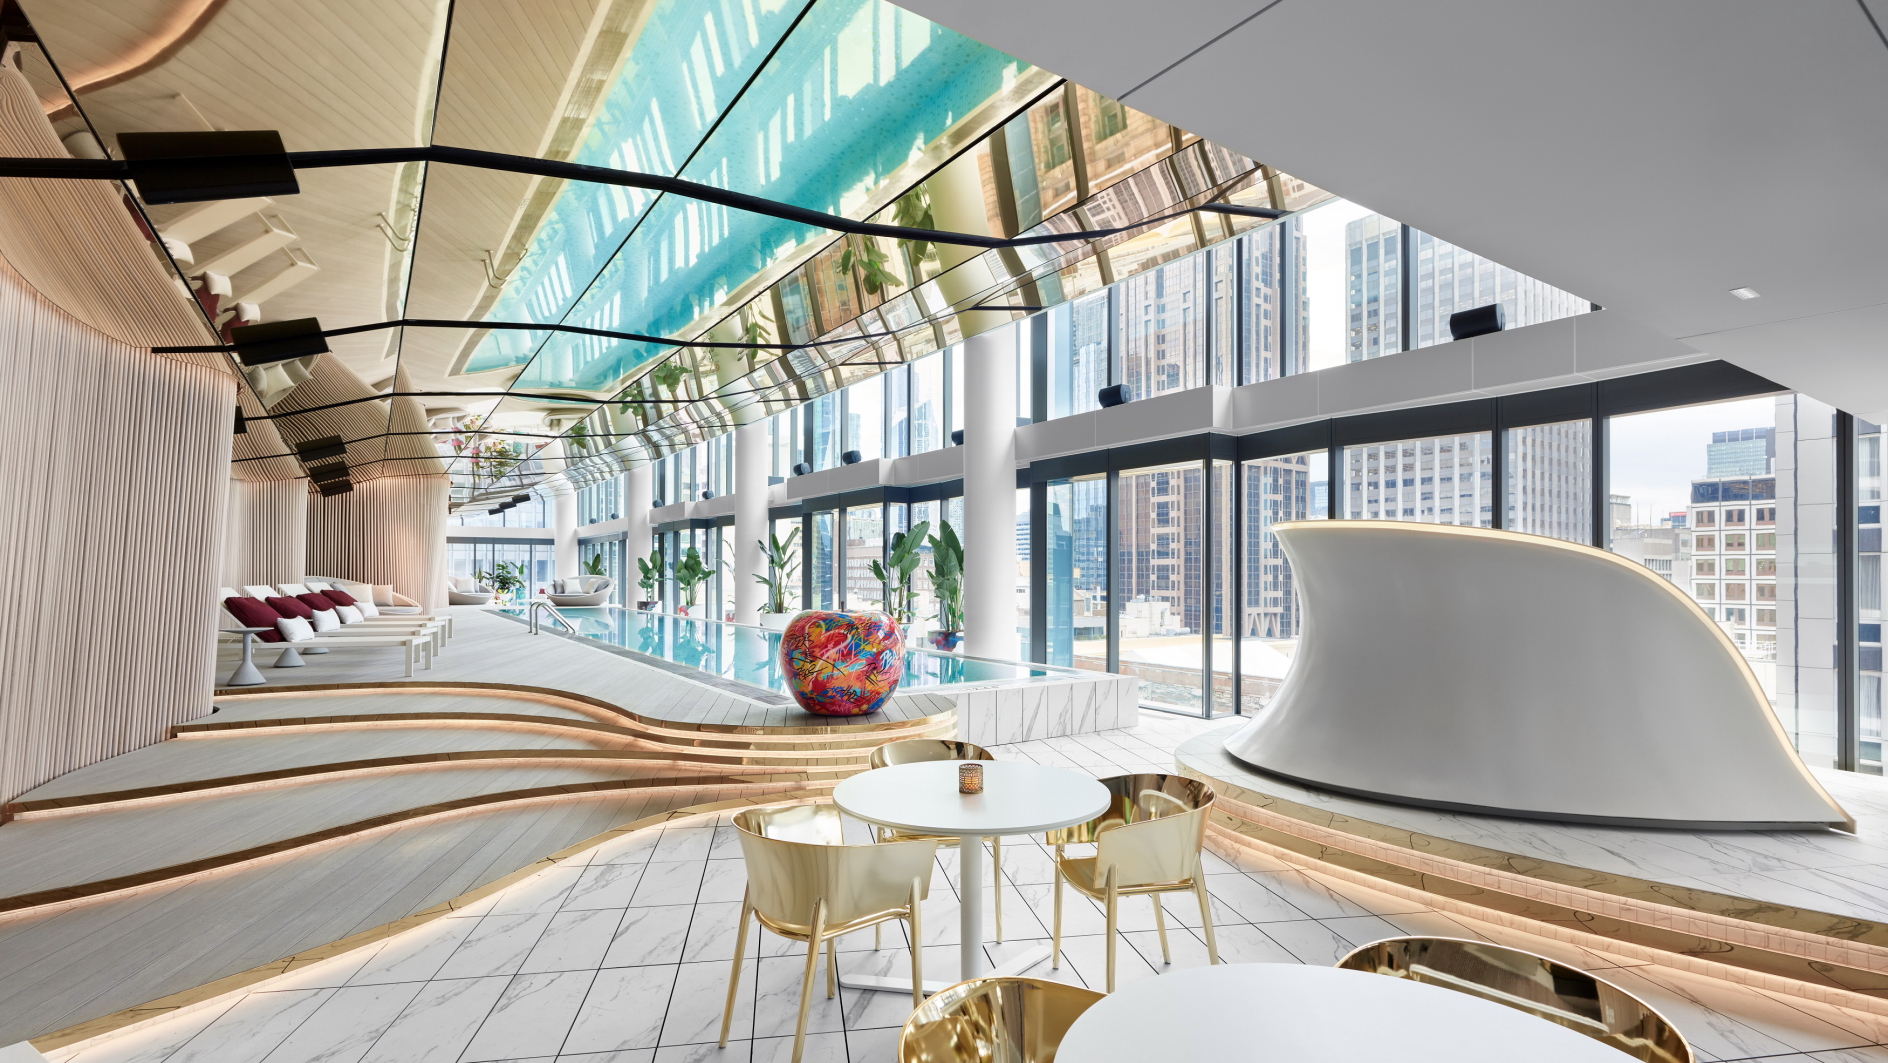 The W Melbourne features an indoor pool which boasts a poolside bar and DJ booth. Click to enlarge.